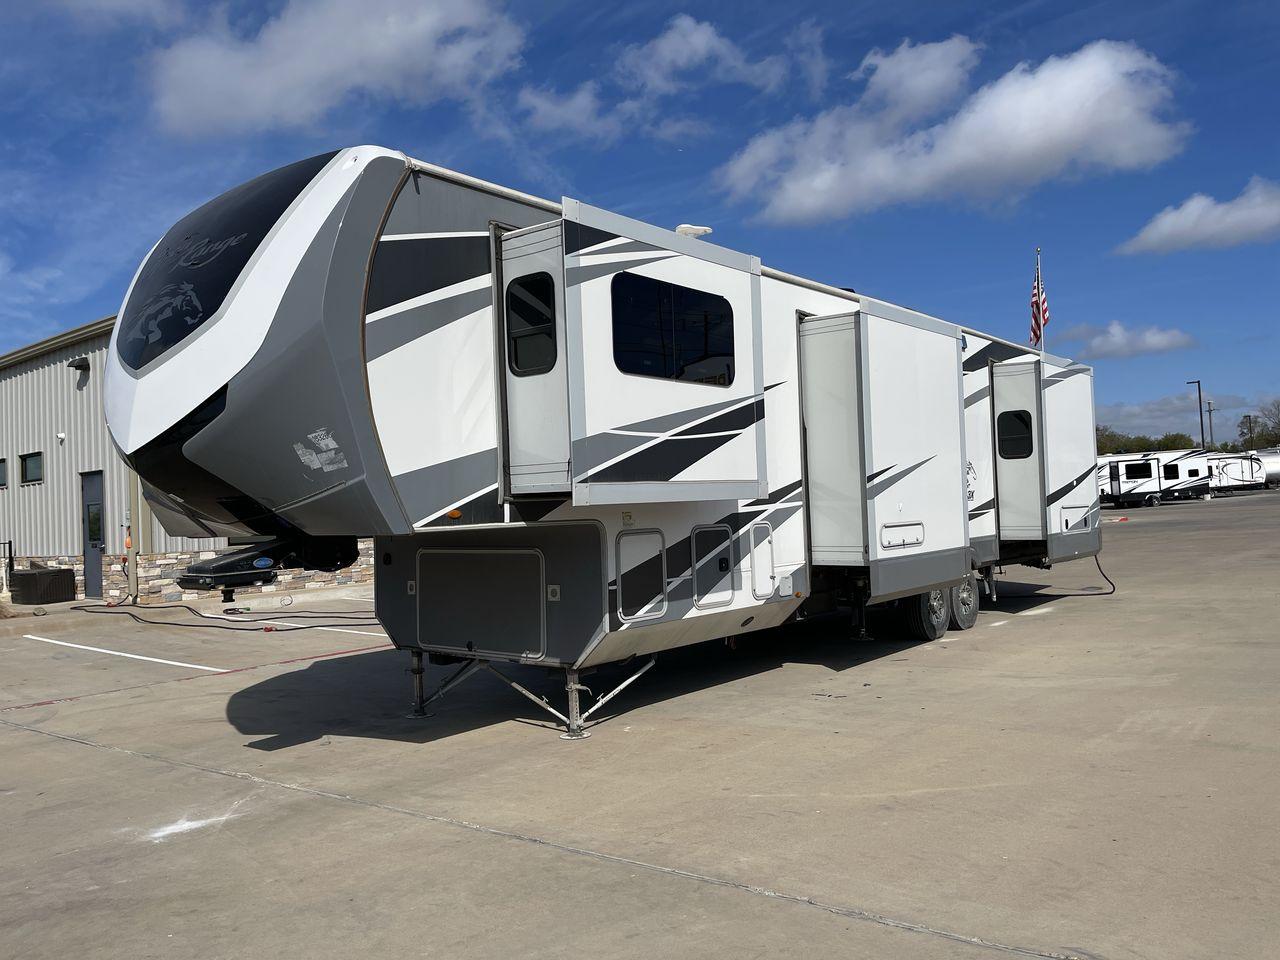 2018 HIGHLAND RIDGE OPEN RANGE 3X387RBS (58TCH0BVXJ3) , Length: 41.5 ft. | Dry Weight: 13,320 lbs. | Gross Weight: 16,470 lbs. | Slides: 5 transmission, located at 4319 N Main Street, Cleburne, TX, 76033, (817) 221-0660, 32.435829, -97.384178 - This impressive model spans 41.5 feet in length and boasts a substantial GVWR of 16,470 lbs, ensuring both durability and stability on the road. Crafted with precision and attention to detail, the Open Range 3X387RBS features a robust aluminum frame and fiberglass sidewalls, promising years of relia - Photo #24